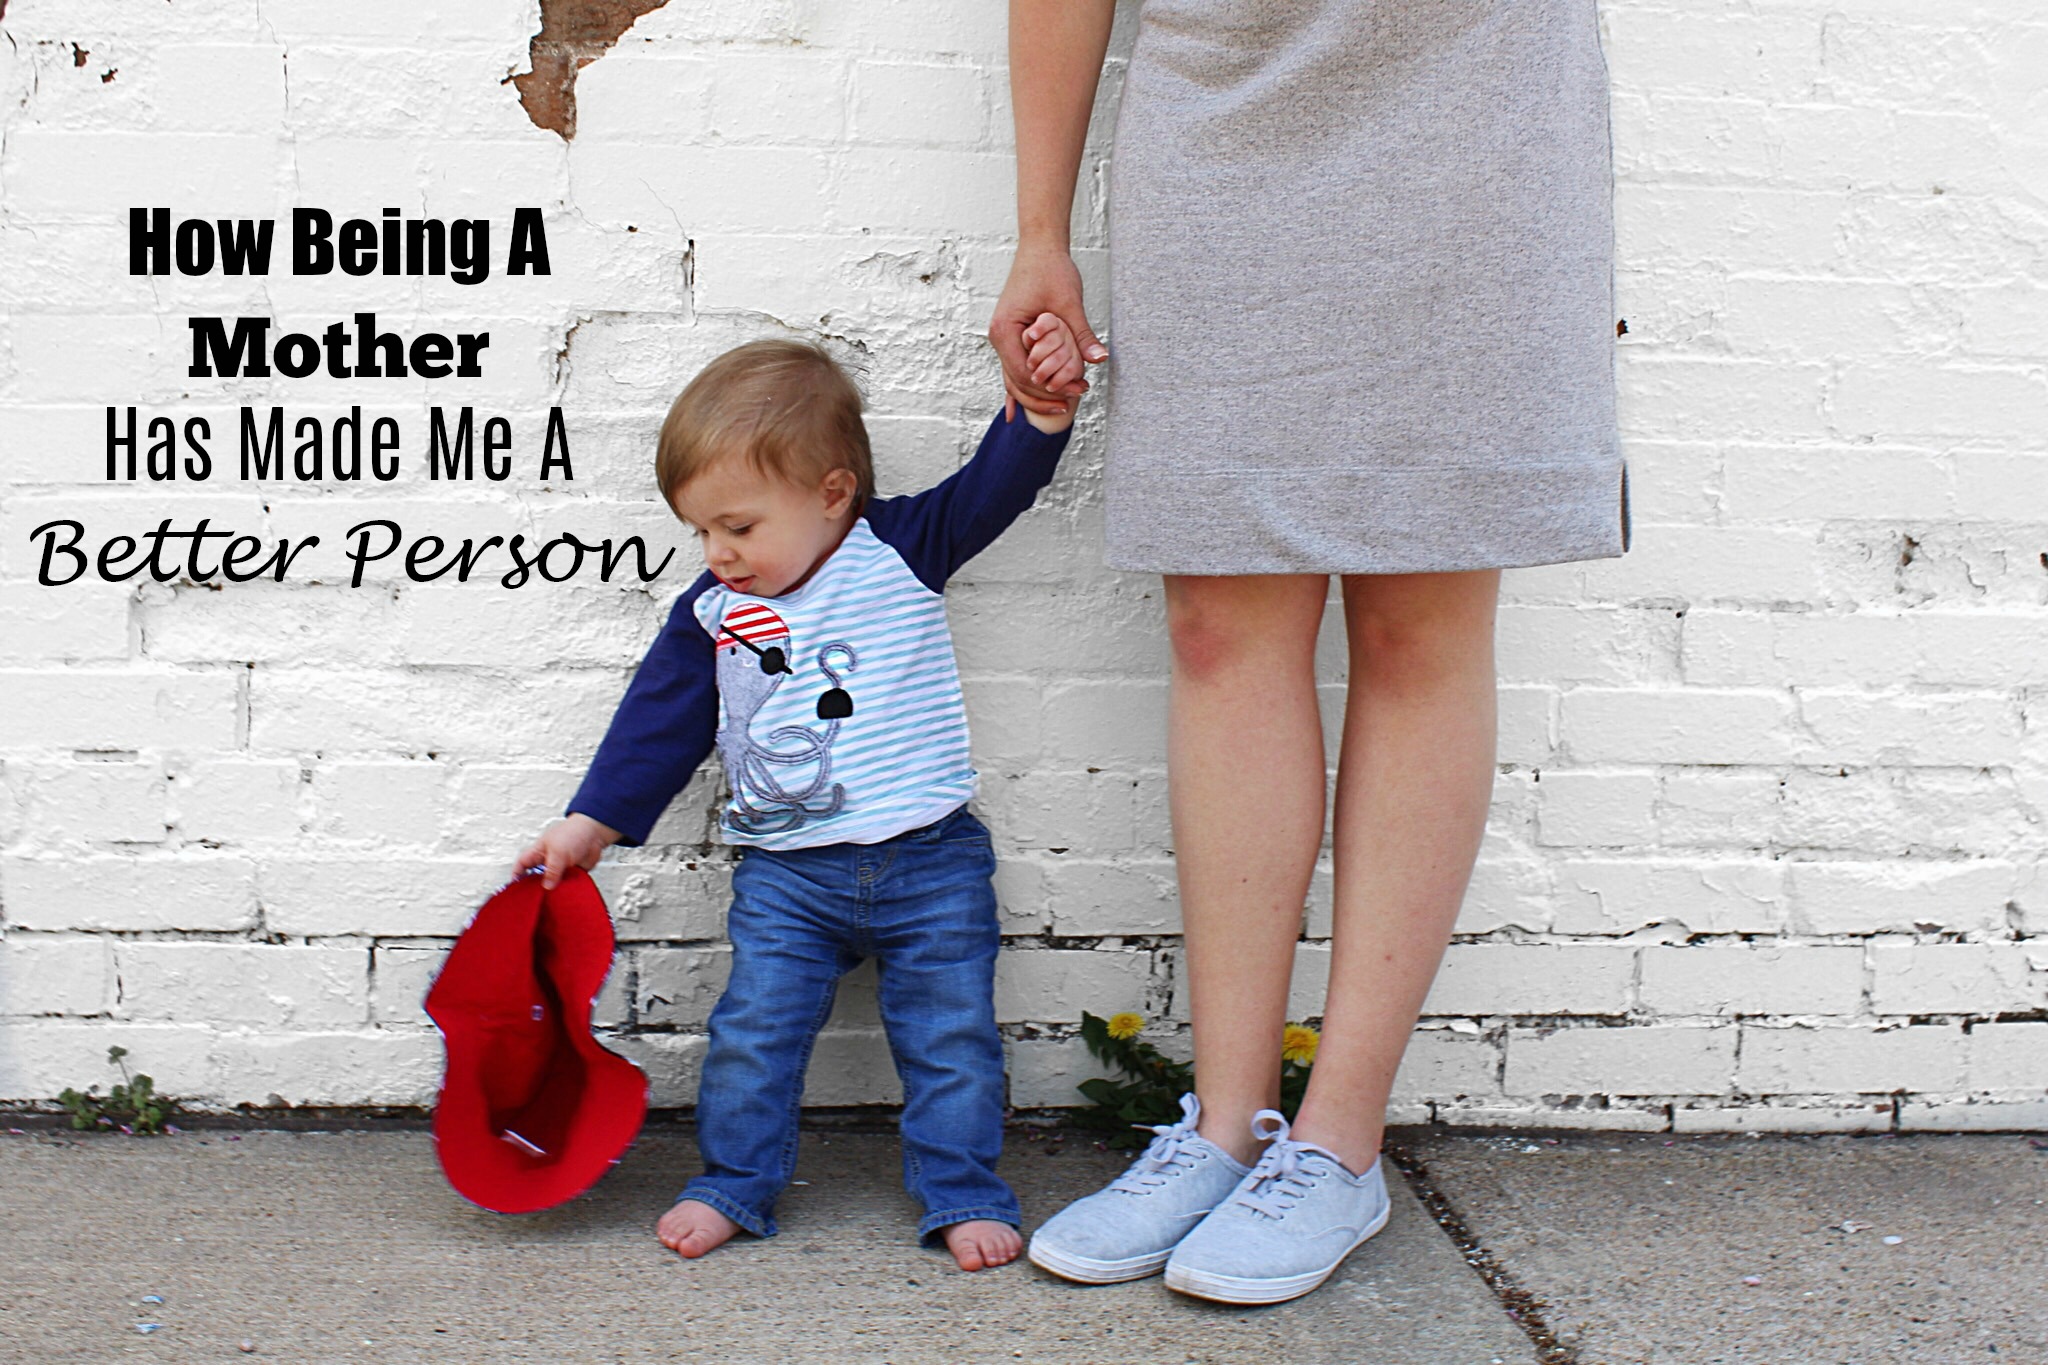 How Being A Mother Has Made Me Better